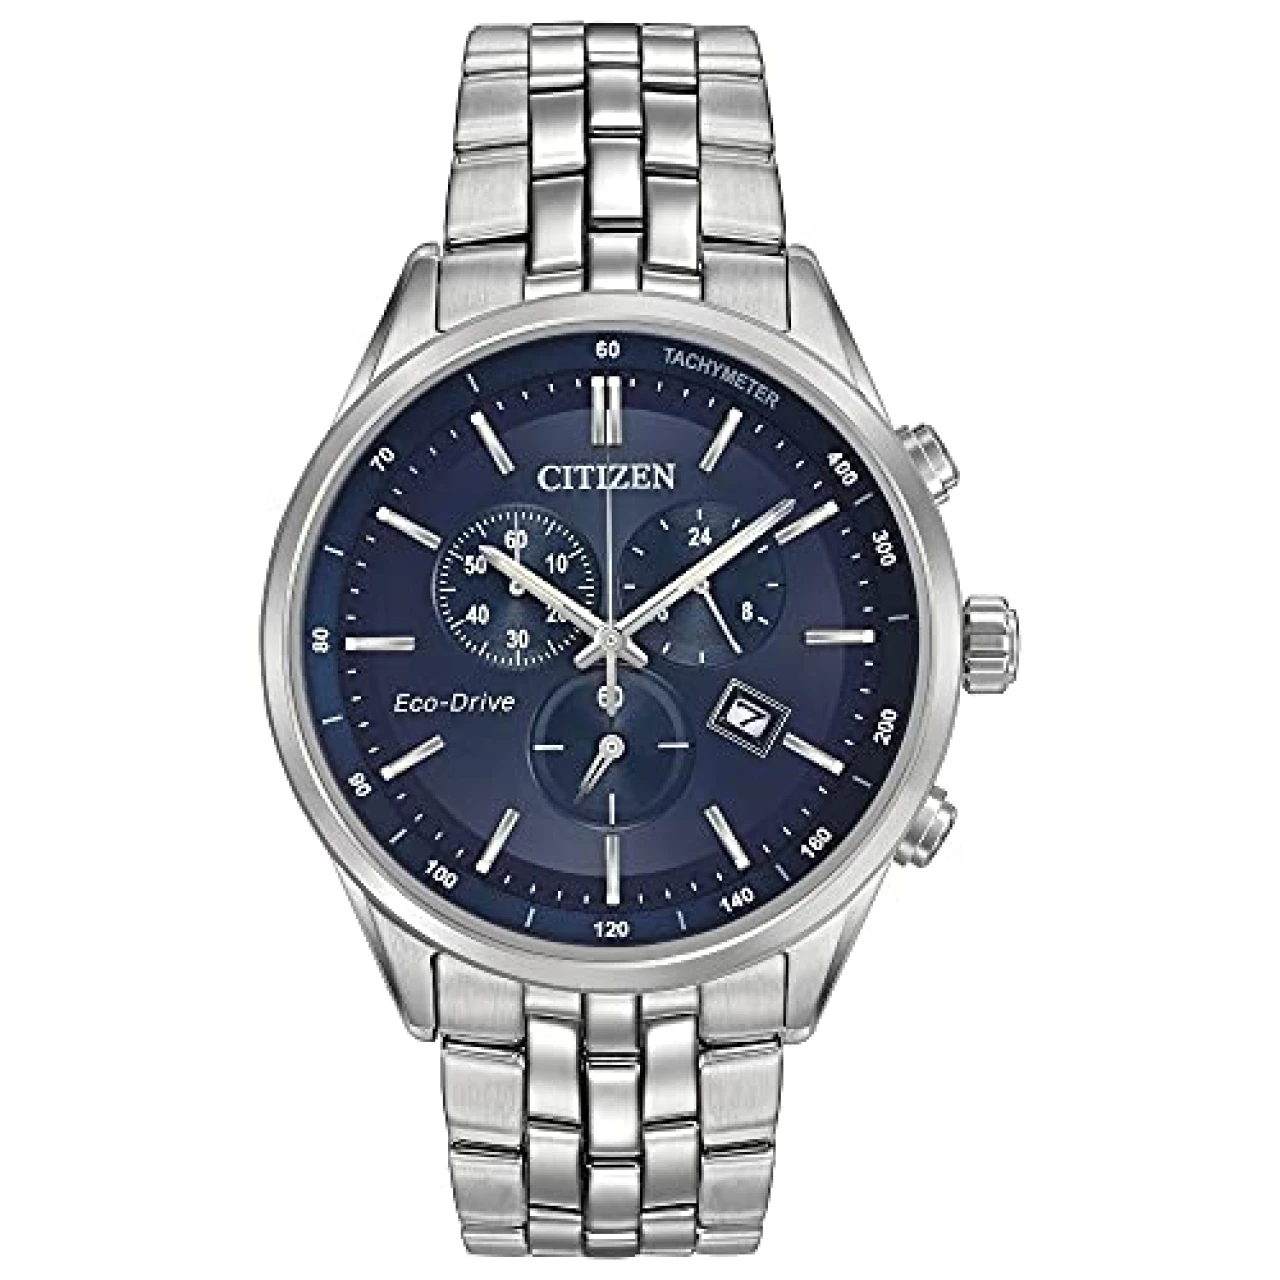 Citizen Men&rsquo;s Classic Corso Eco-Drive Watch, Chronograph, 12/24 Hour Time, Date, Sapphire Crystal, Stainless/ Blue Dial